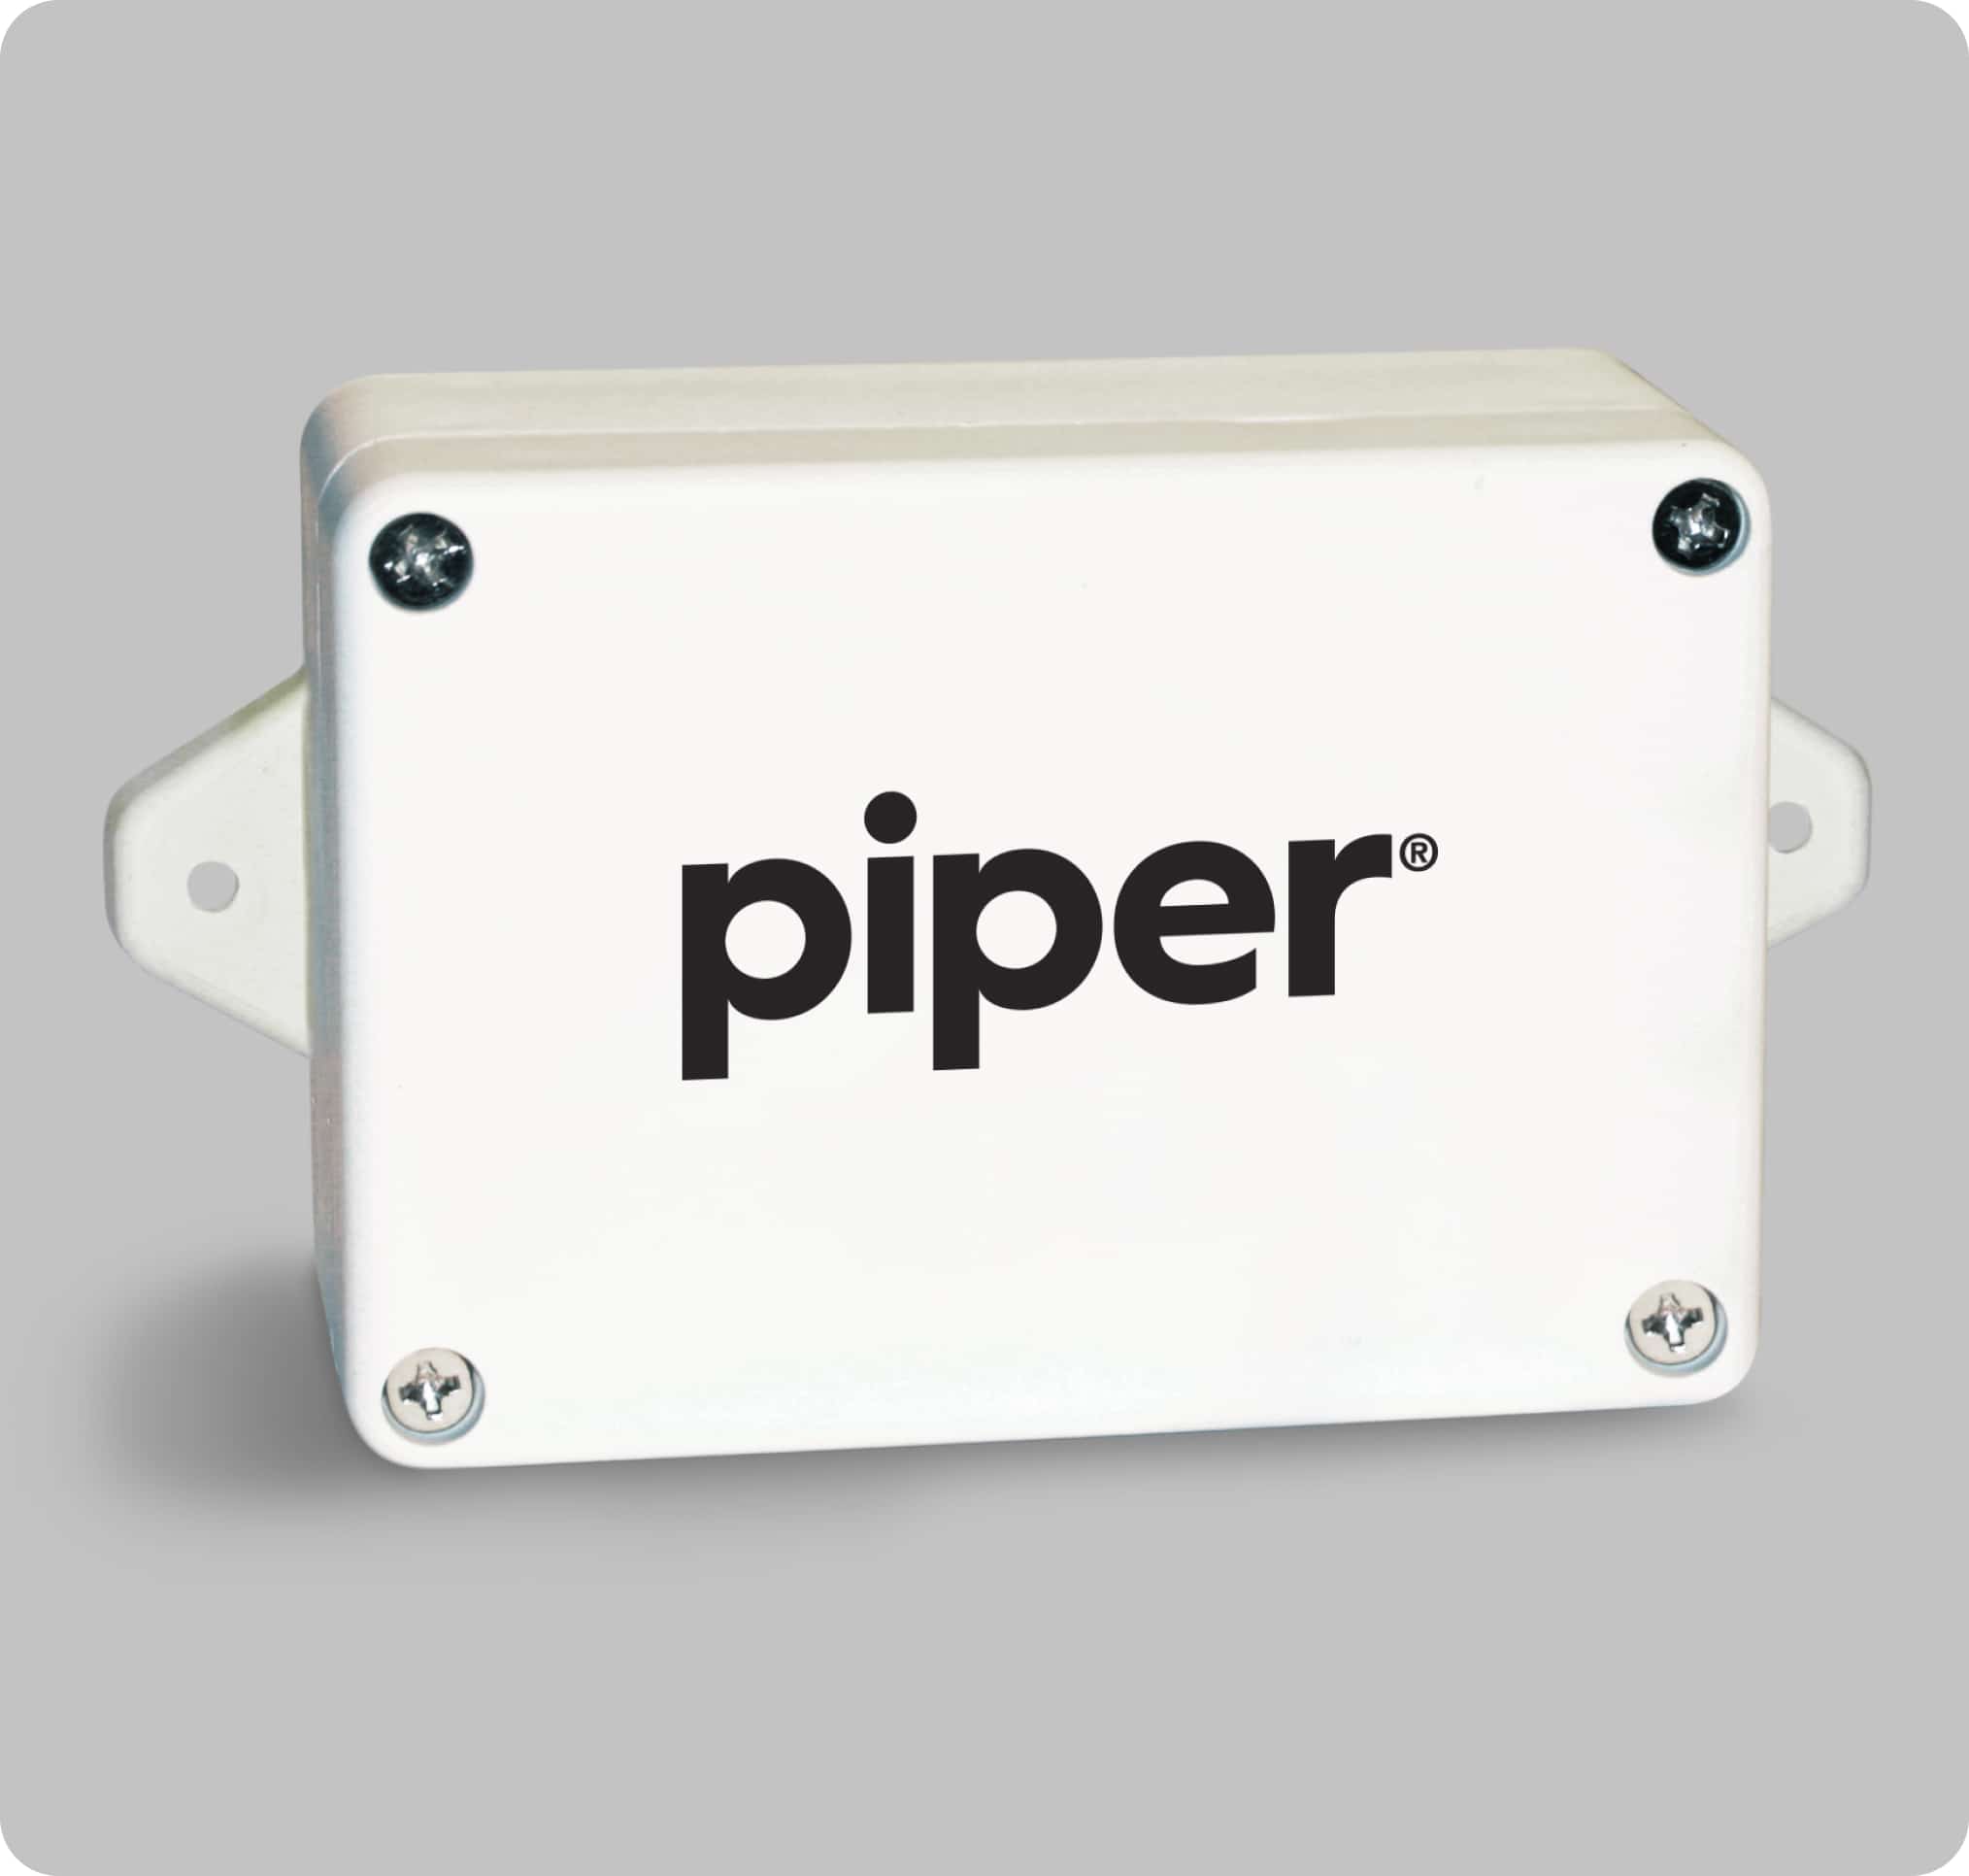 Piper Bluetooth Low Energy (BLE) Beacon